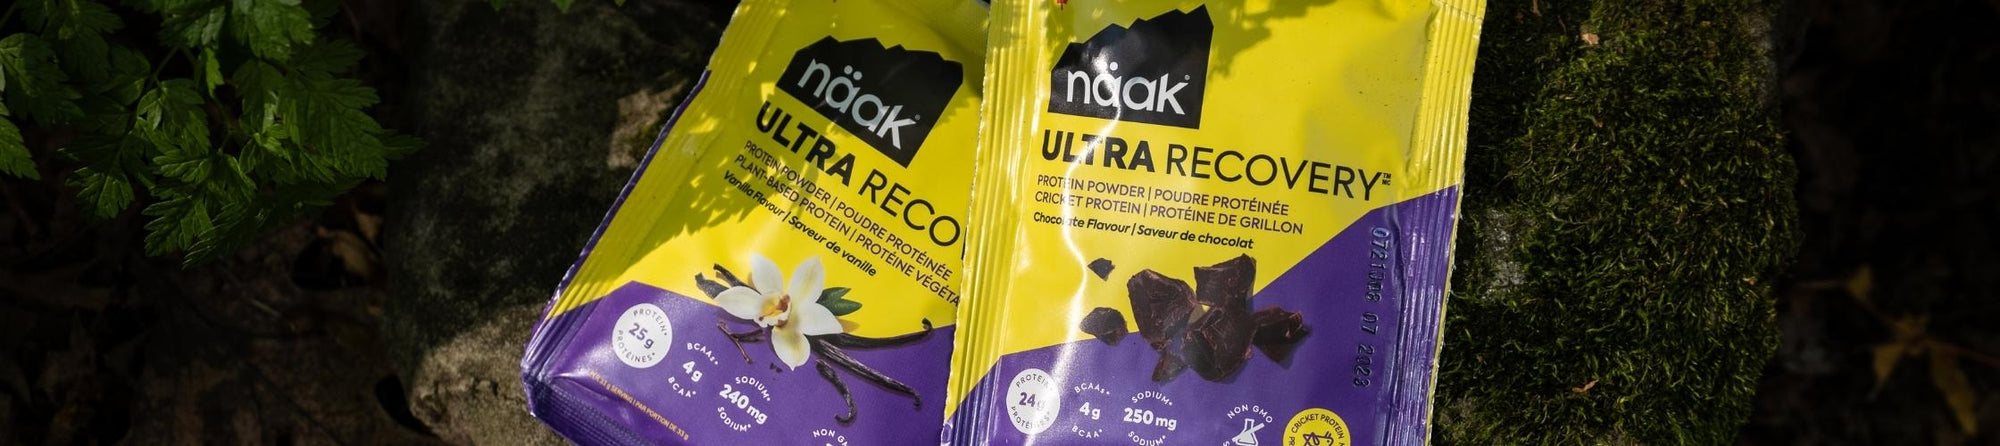 Näak | Blog | 5 nutrition tips to help you recover from injuries